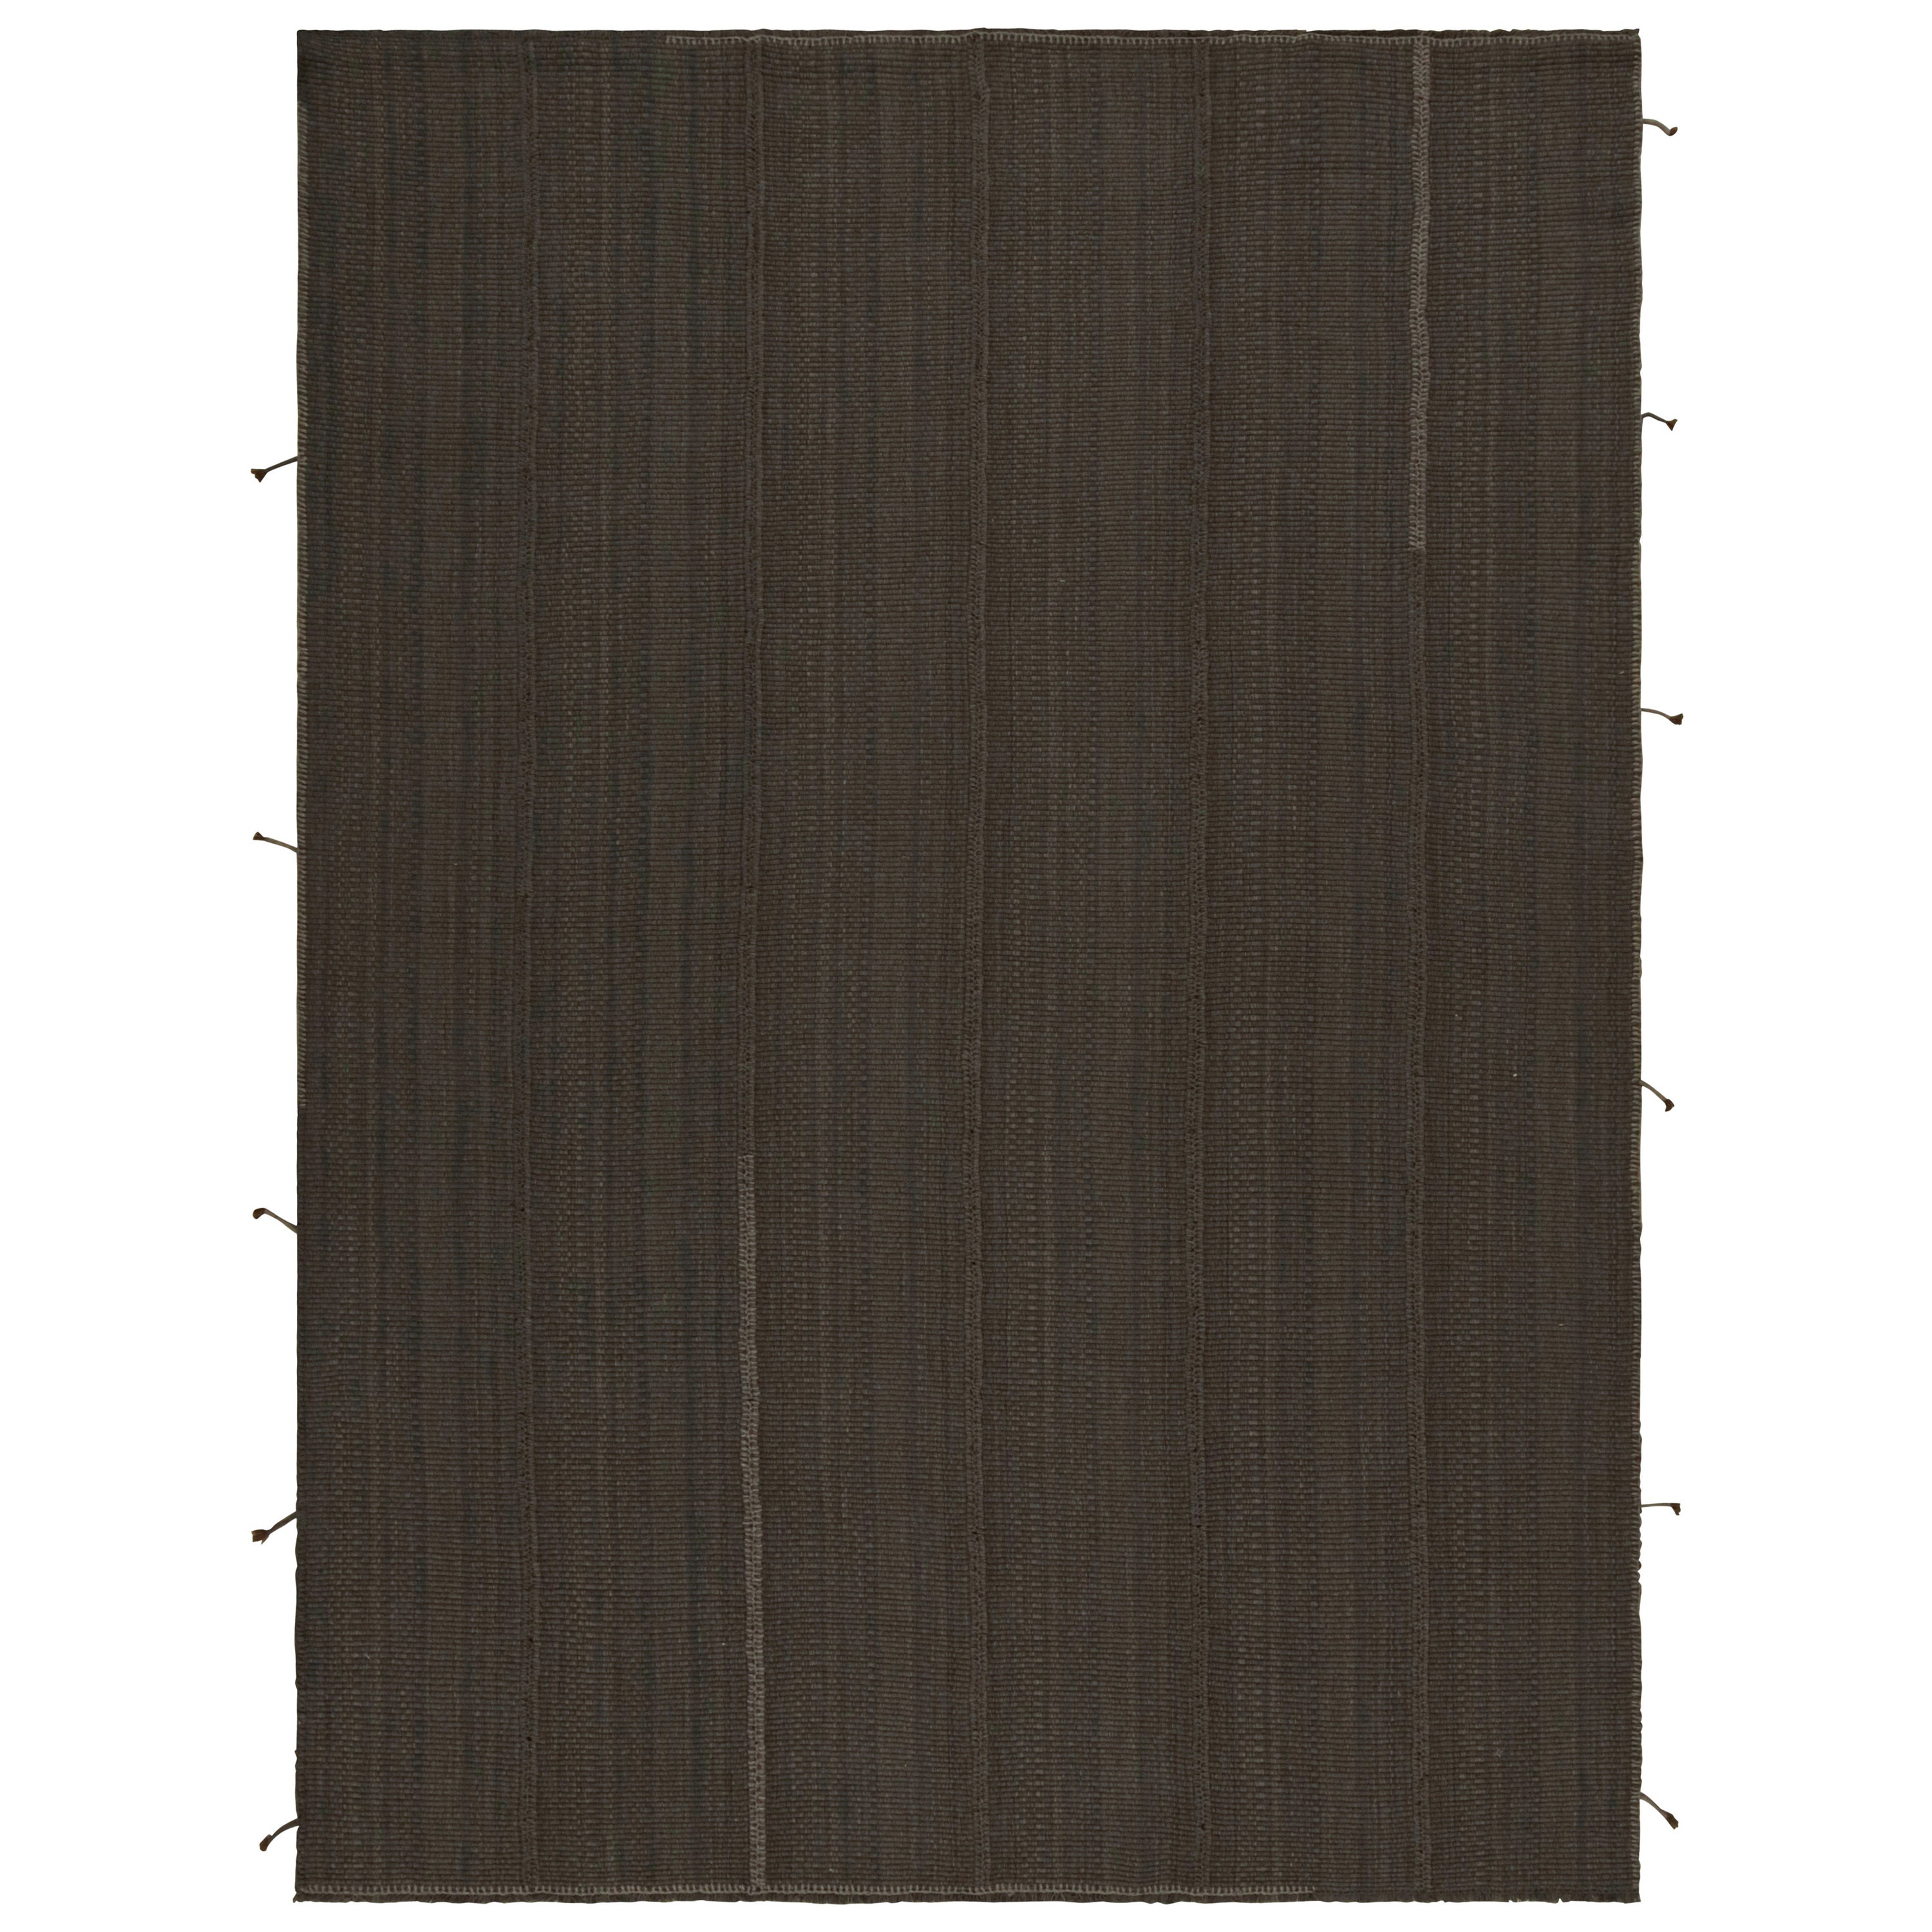 Rug & Kilim’s Contemporary Kilim in Brown, with Beige Accents For Sale